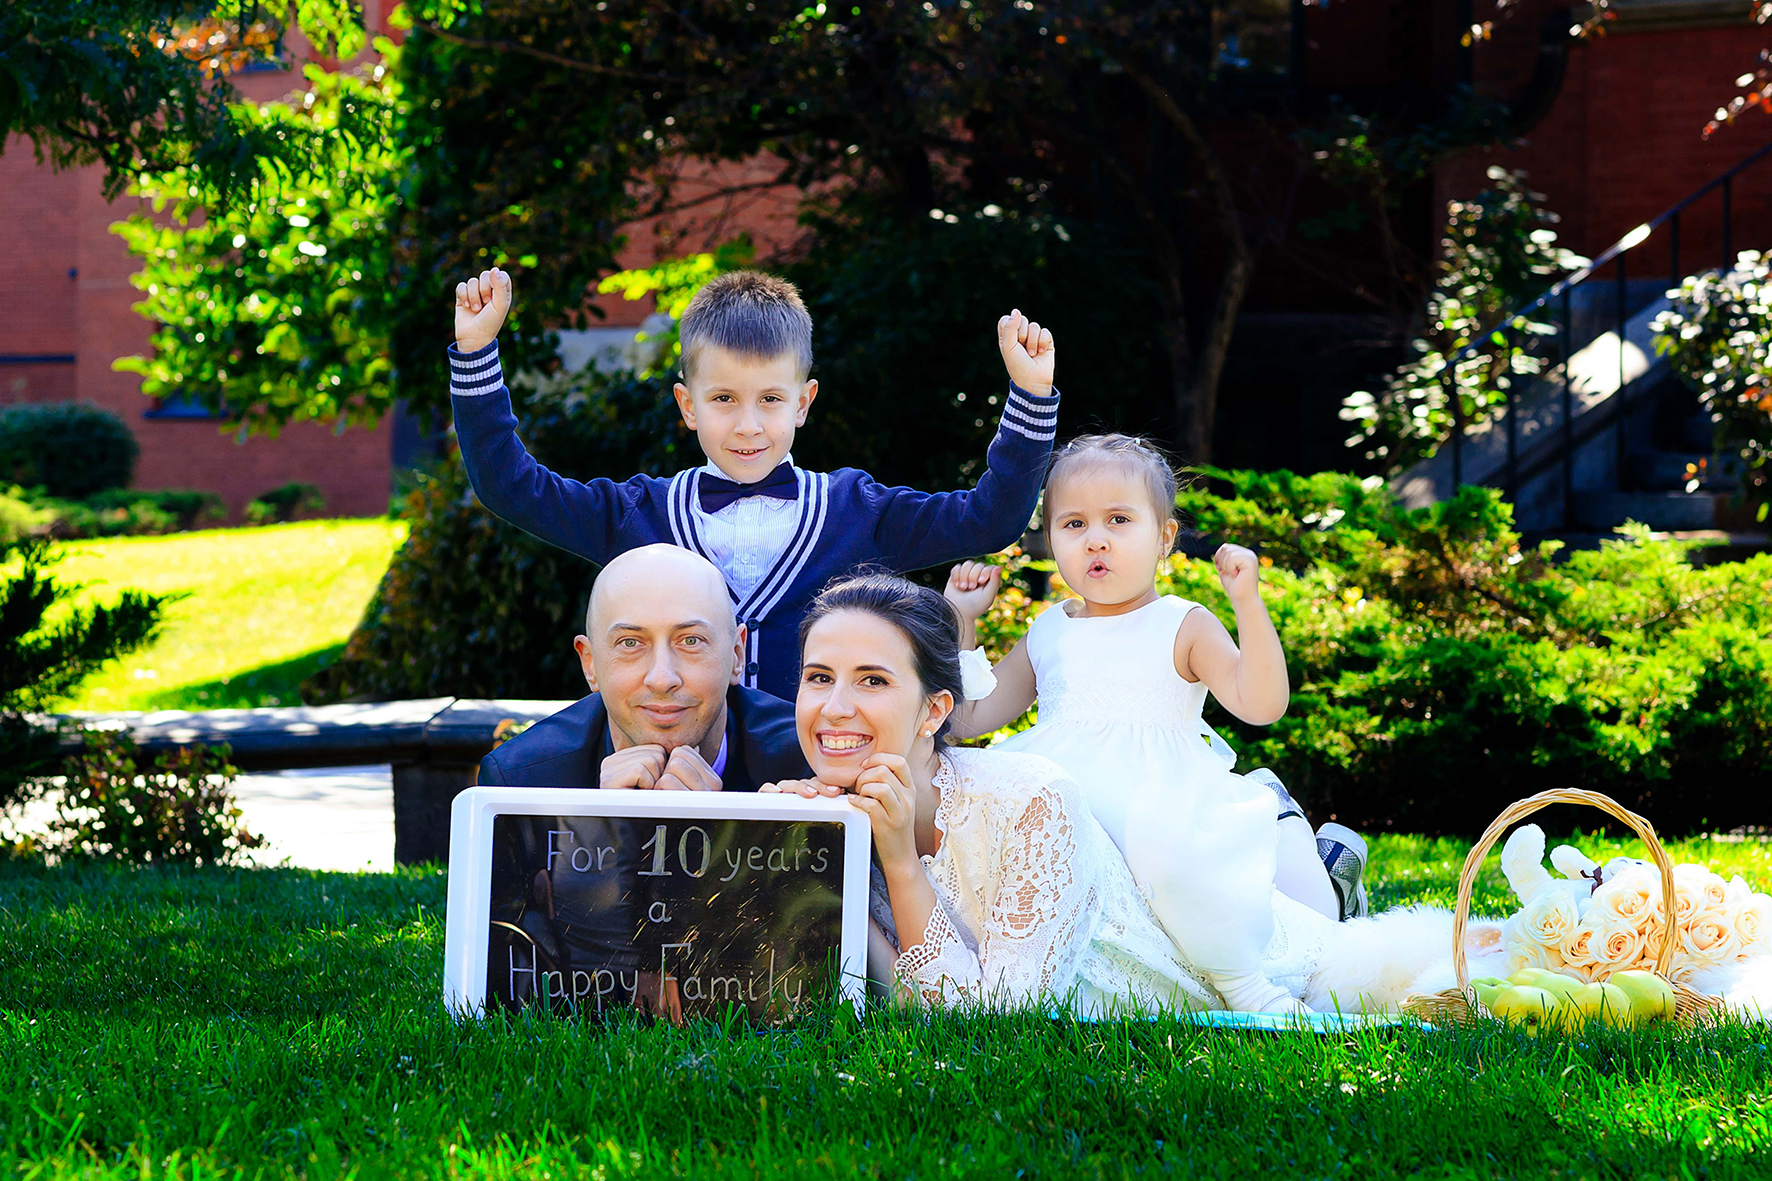 Family photo session with best photographers and professional videographers team – VIO IMAGE